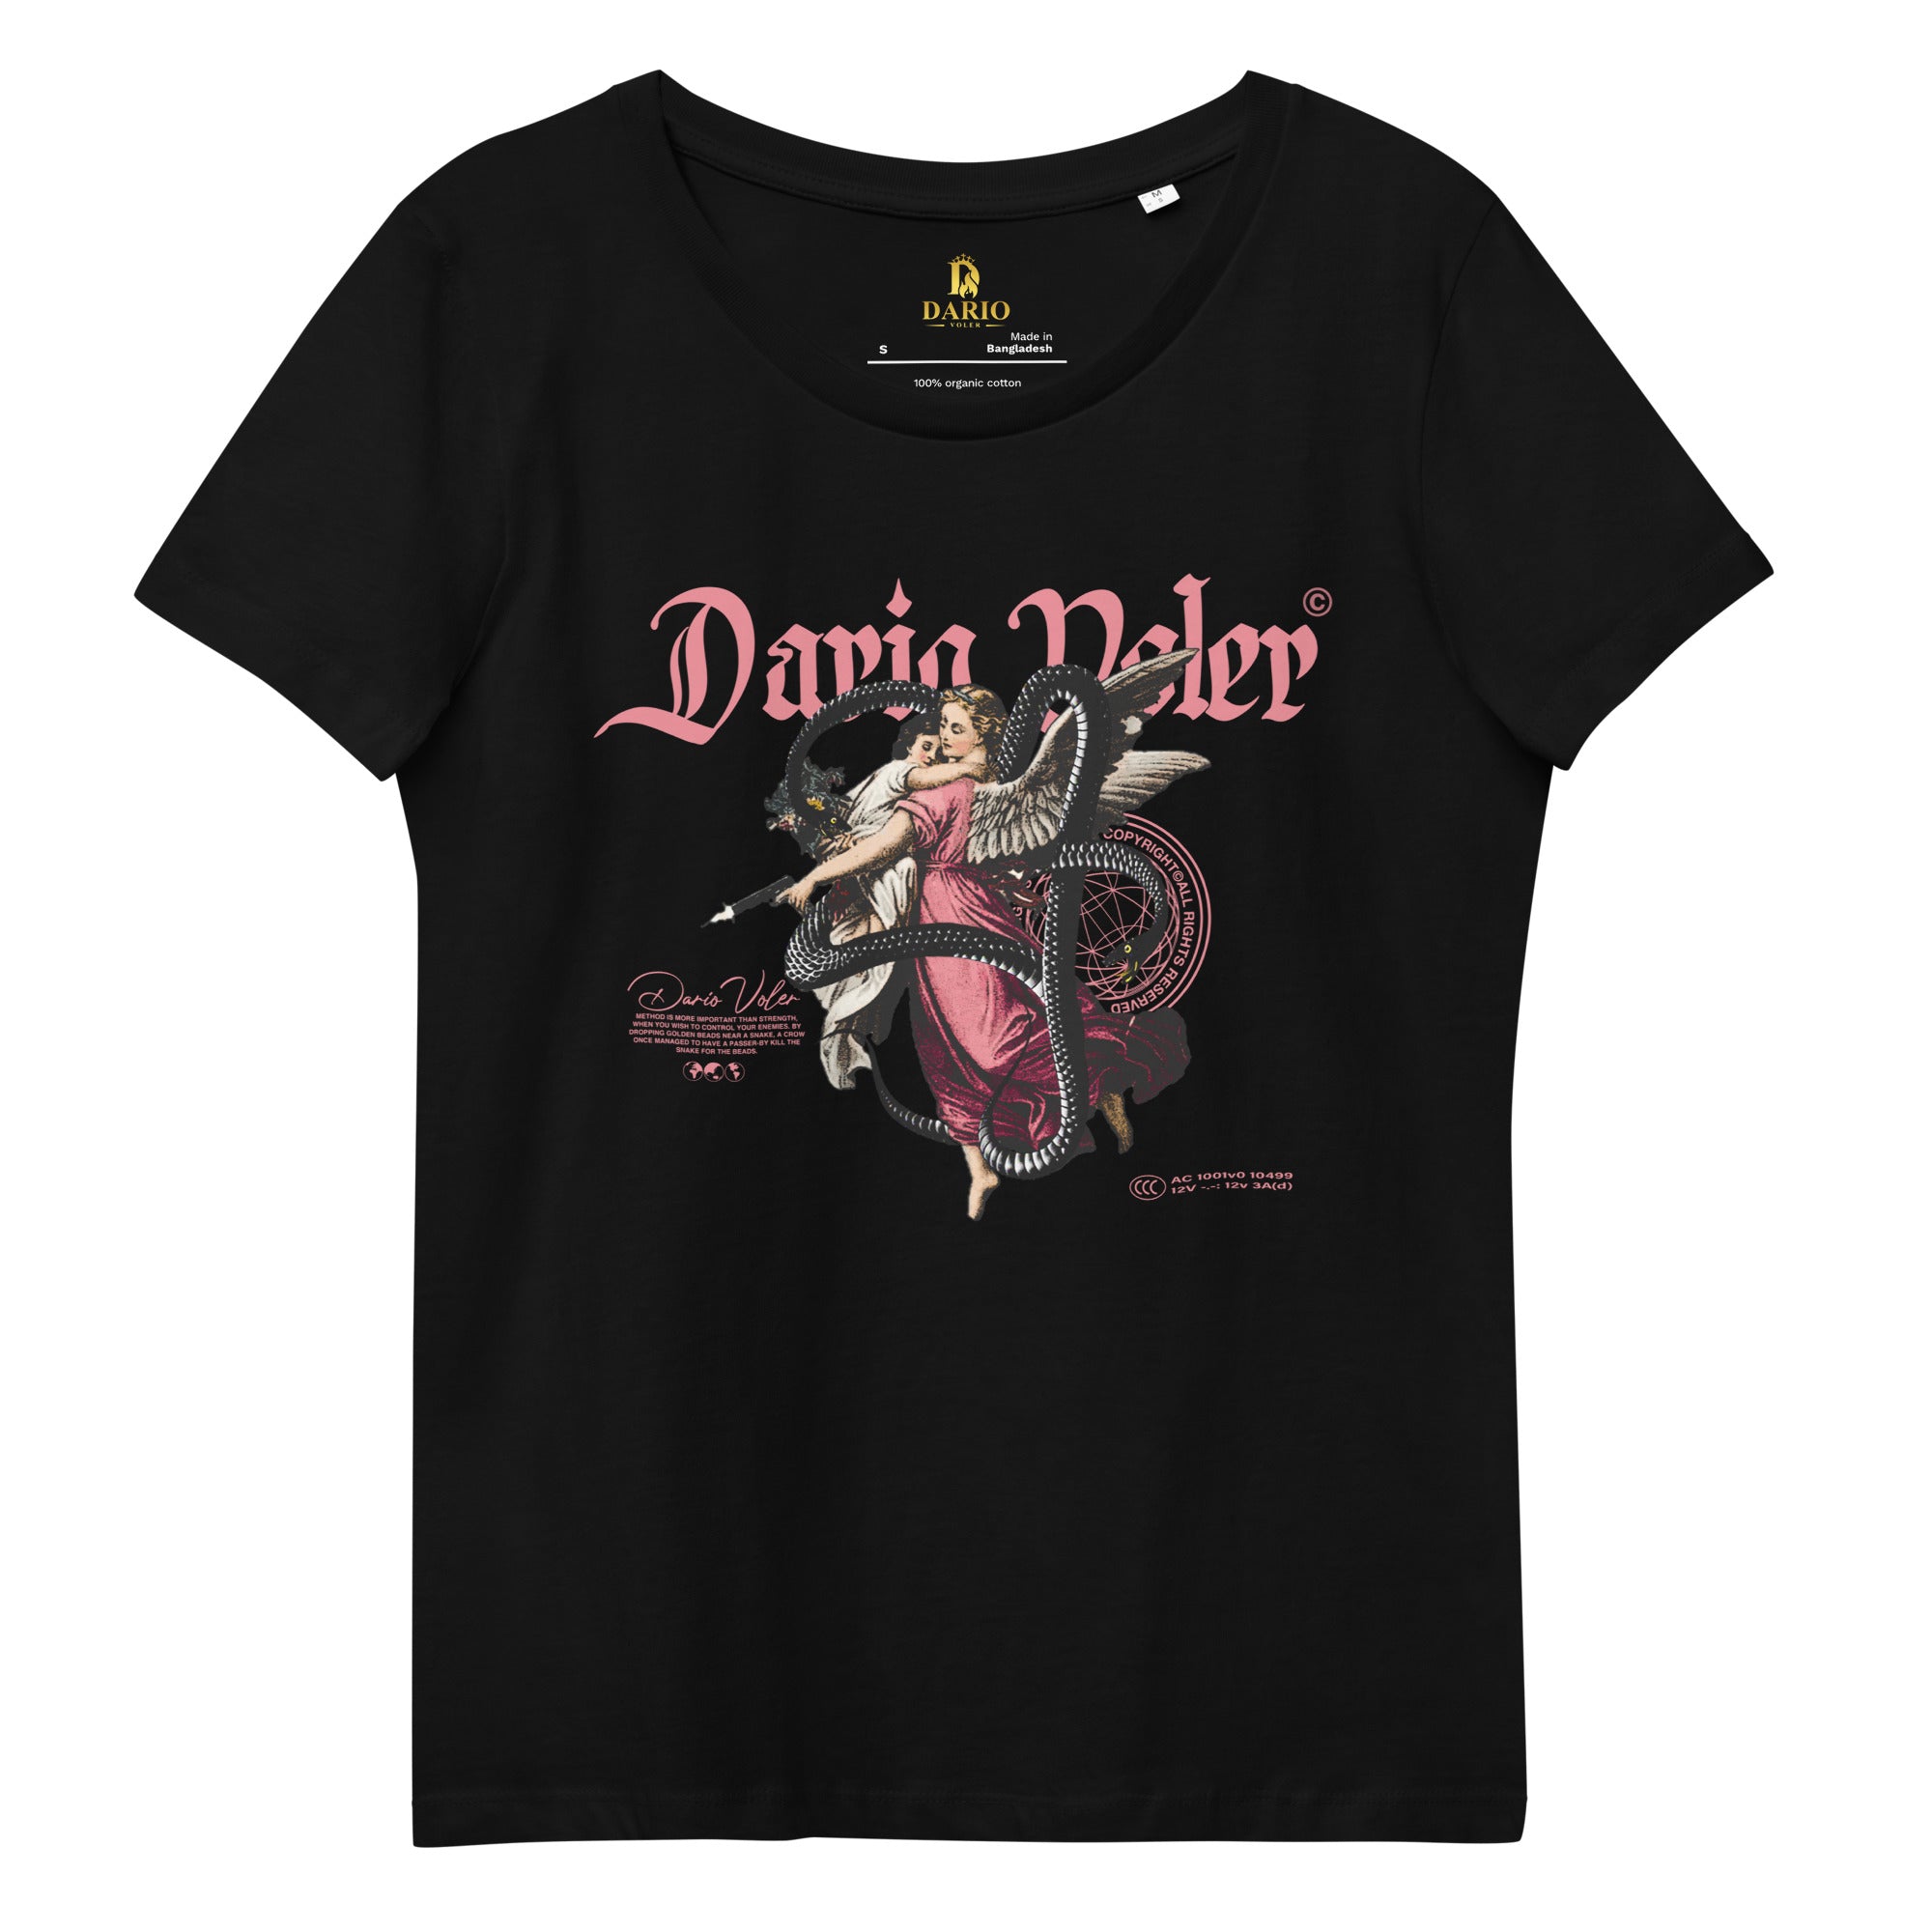 Women's Divine Angel fitted tee